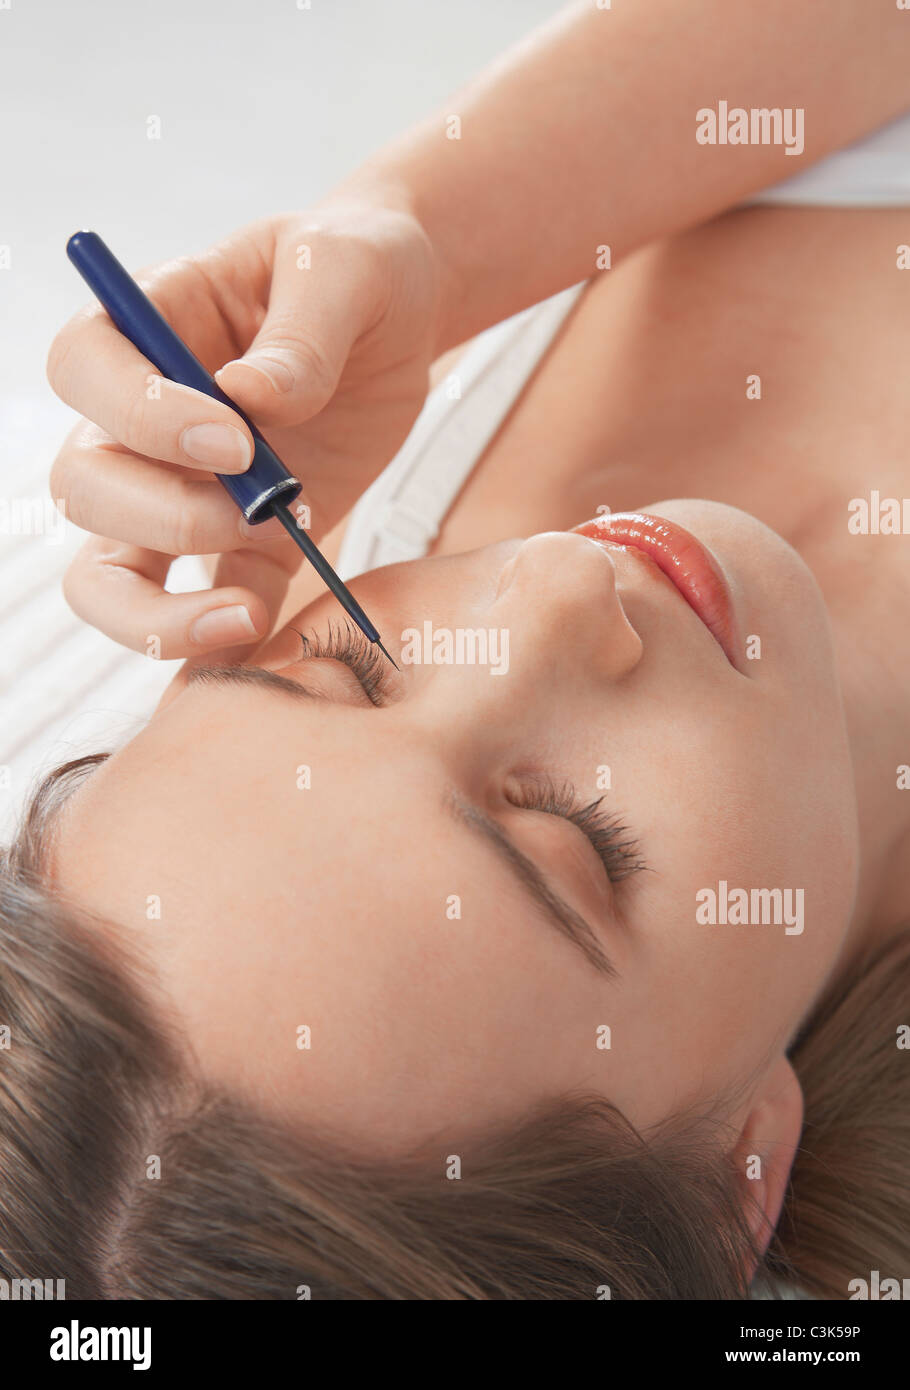 Human hand applying eye liner on a young woman's eyes Stock Photo